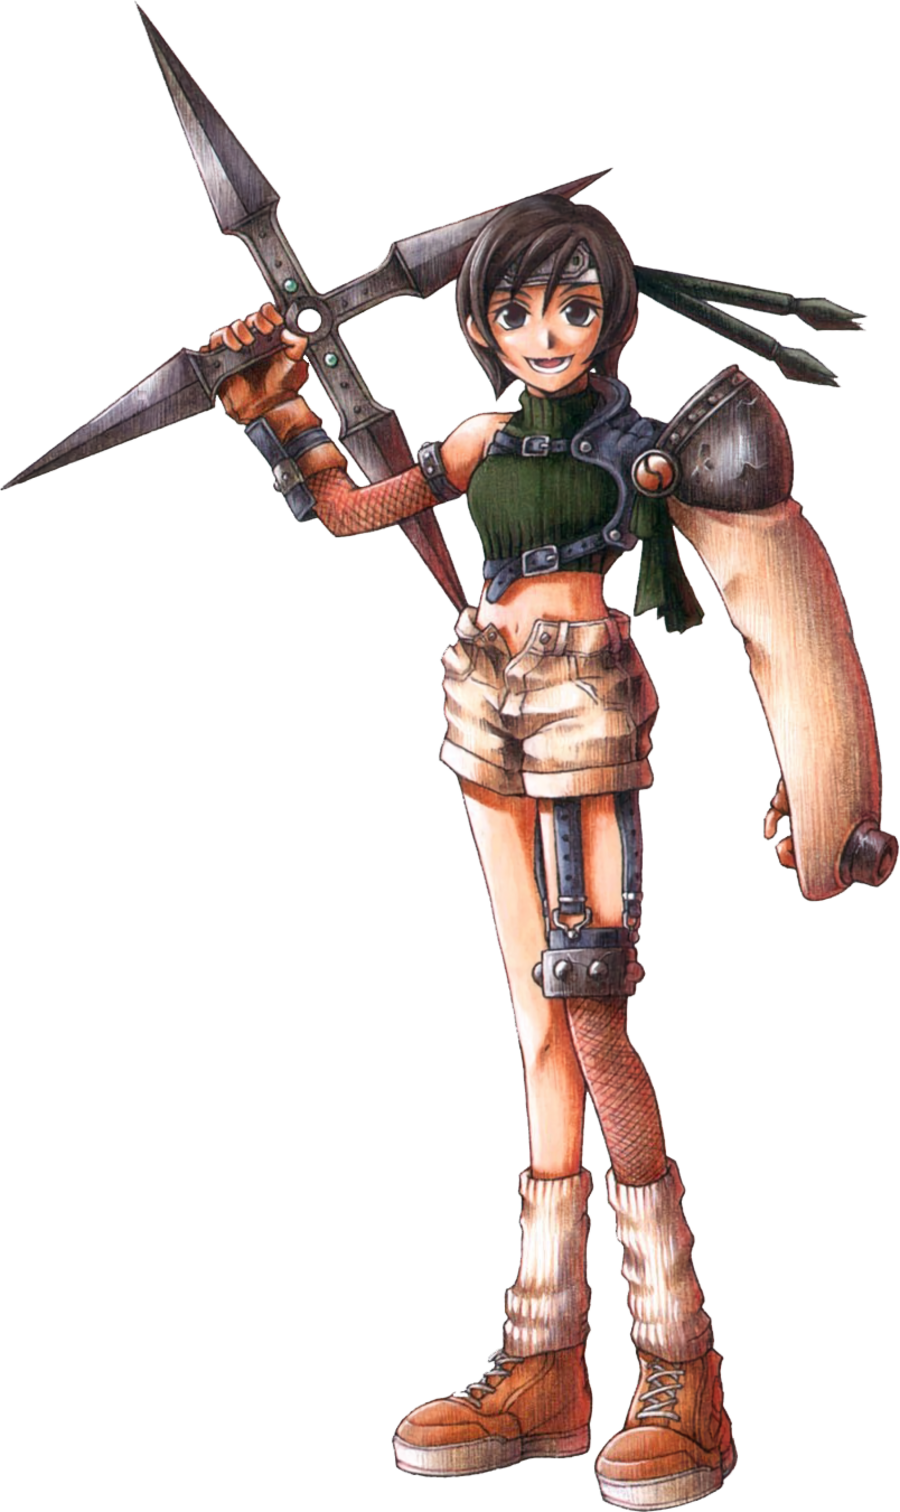 What weapon does Yuffie have equipped when she first joins your party?